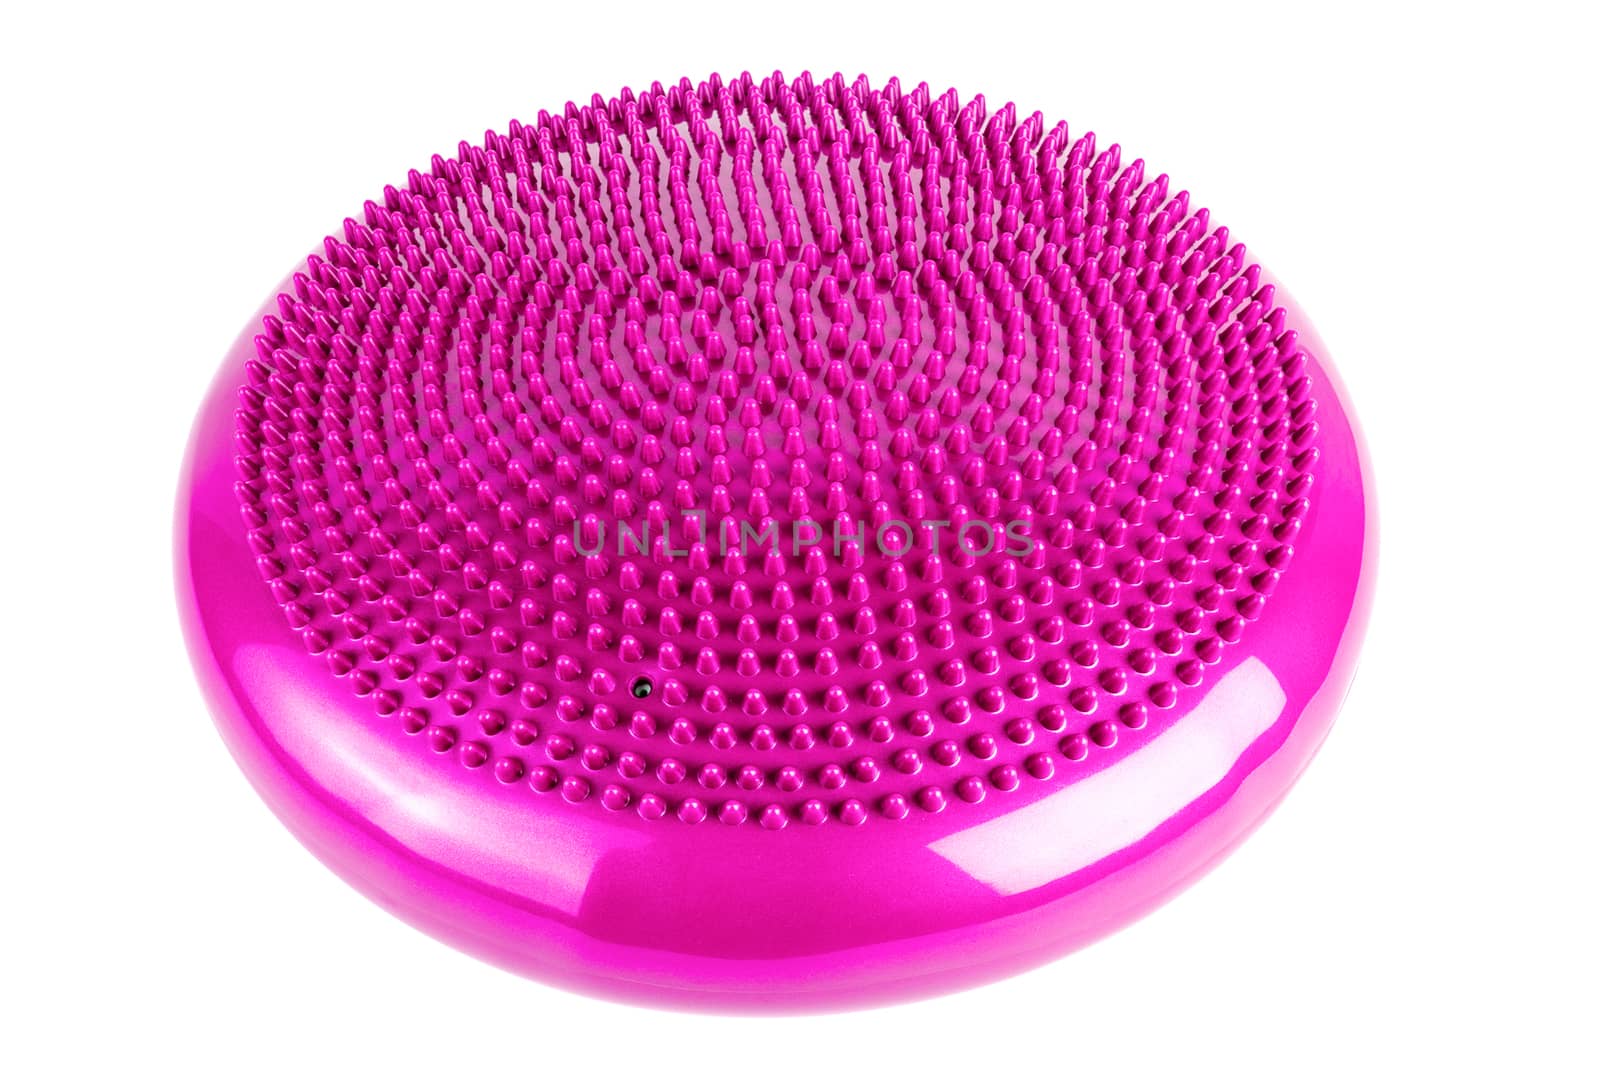 Pink inflatable balance disk isoleated on white background. A balance disk is a cushion can be used in fitness training as the base for core, balance, and stretching exercises. It is also known as a stability disc, wobble disc, and balance cushion.